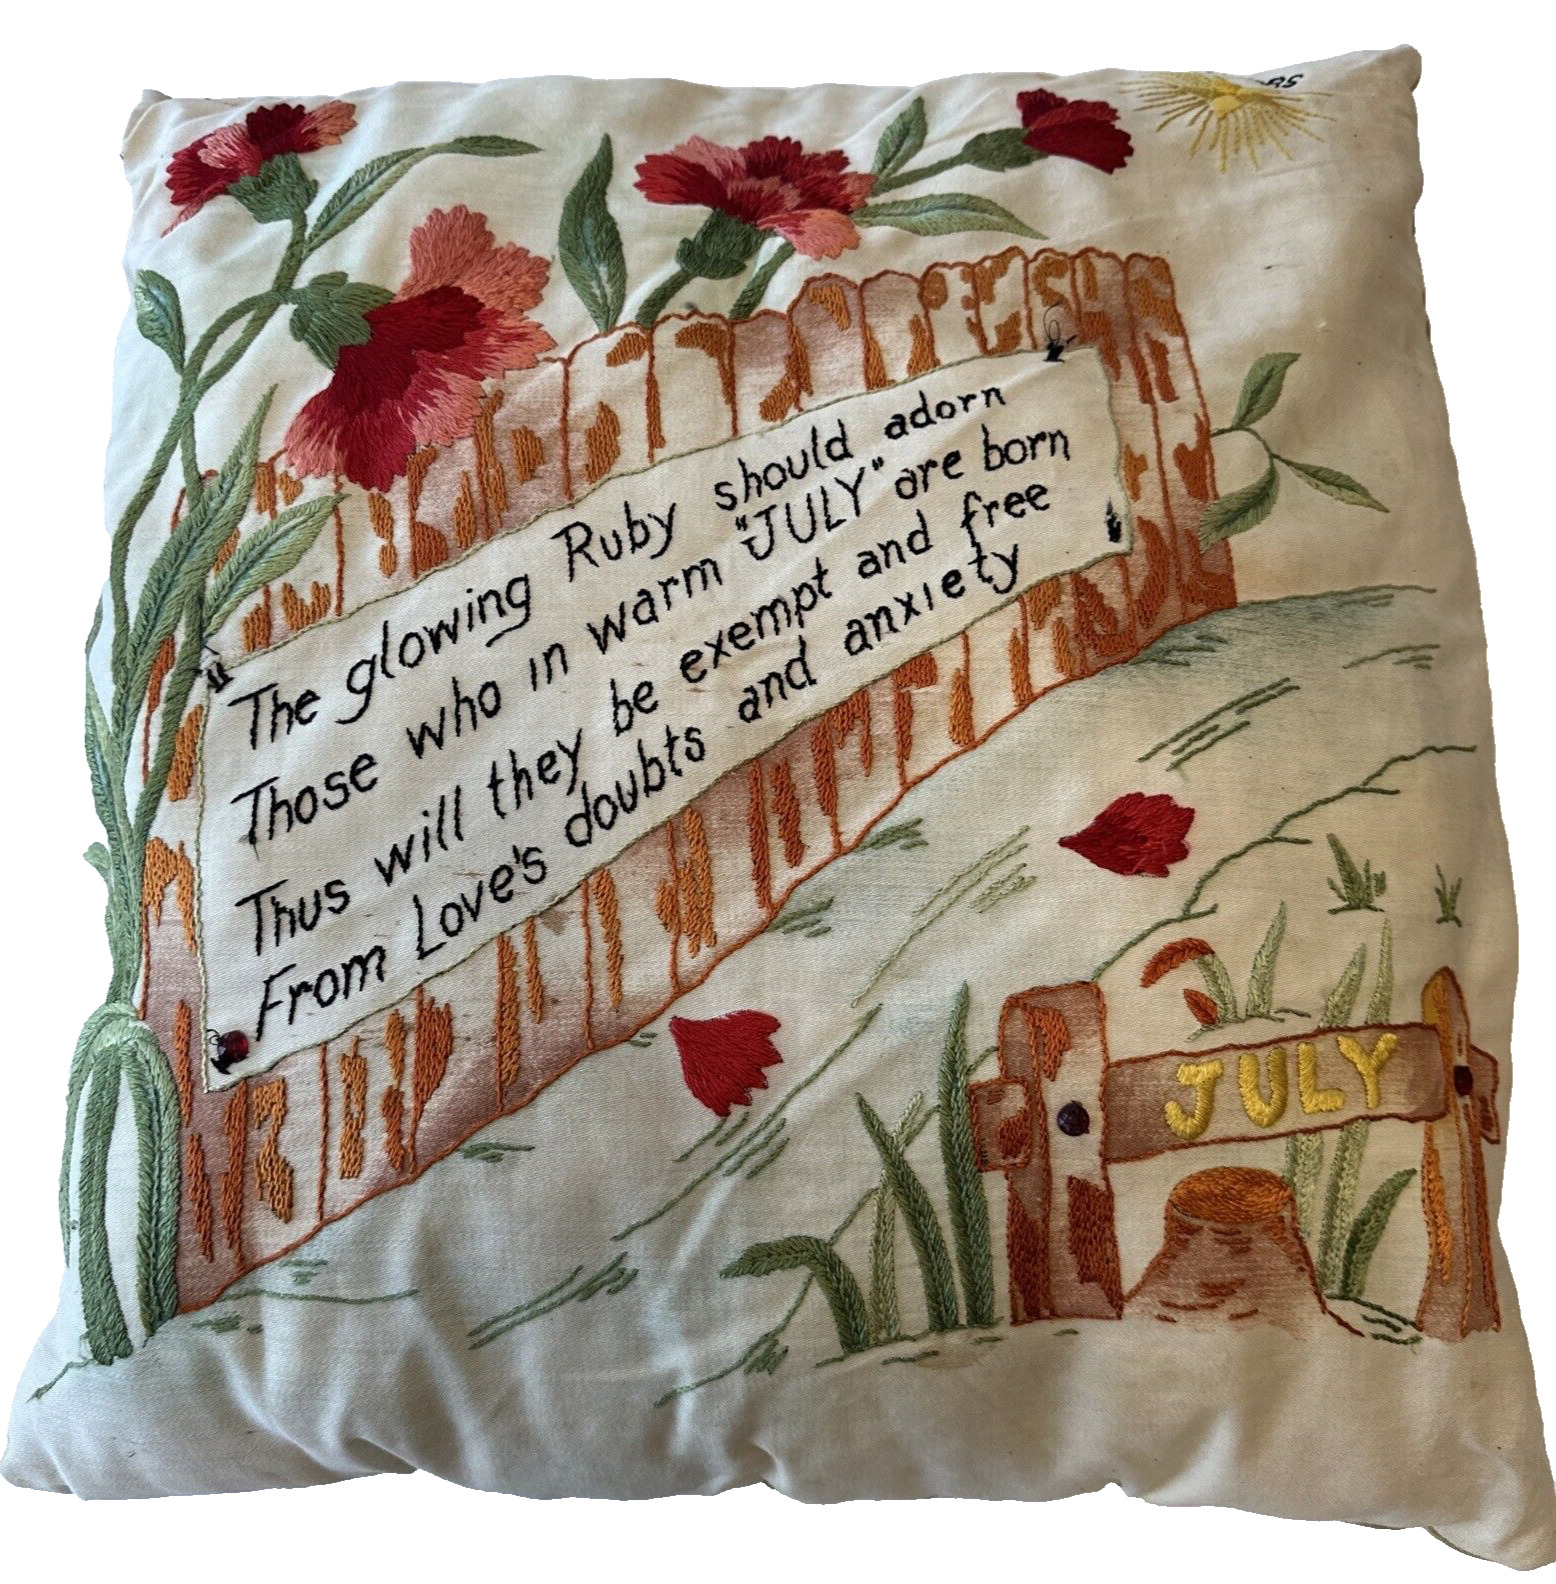 Antique Embroidered Society Silk Pillow Art Nouveau Flowers July Theme Poem